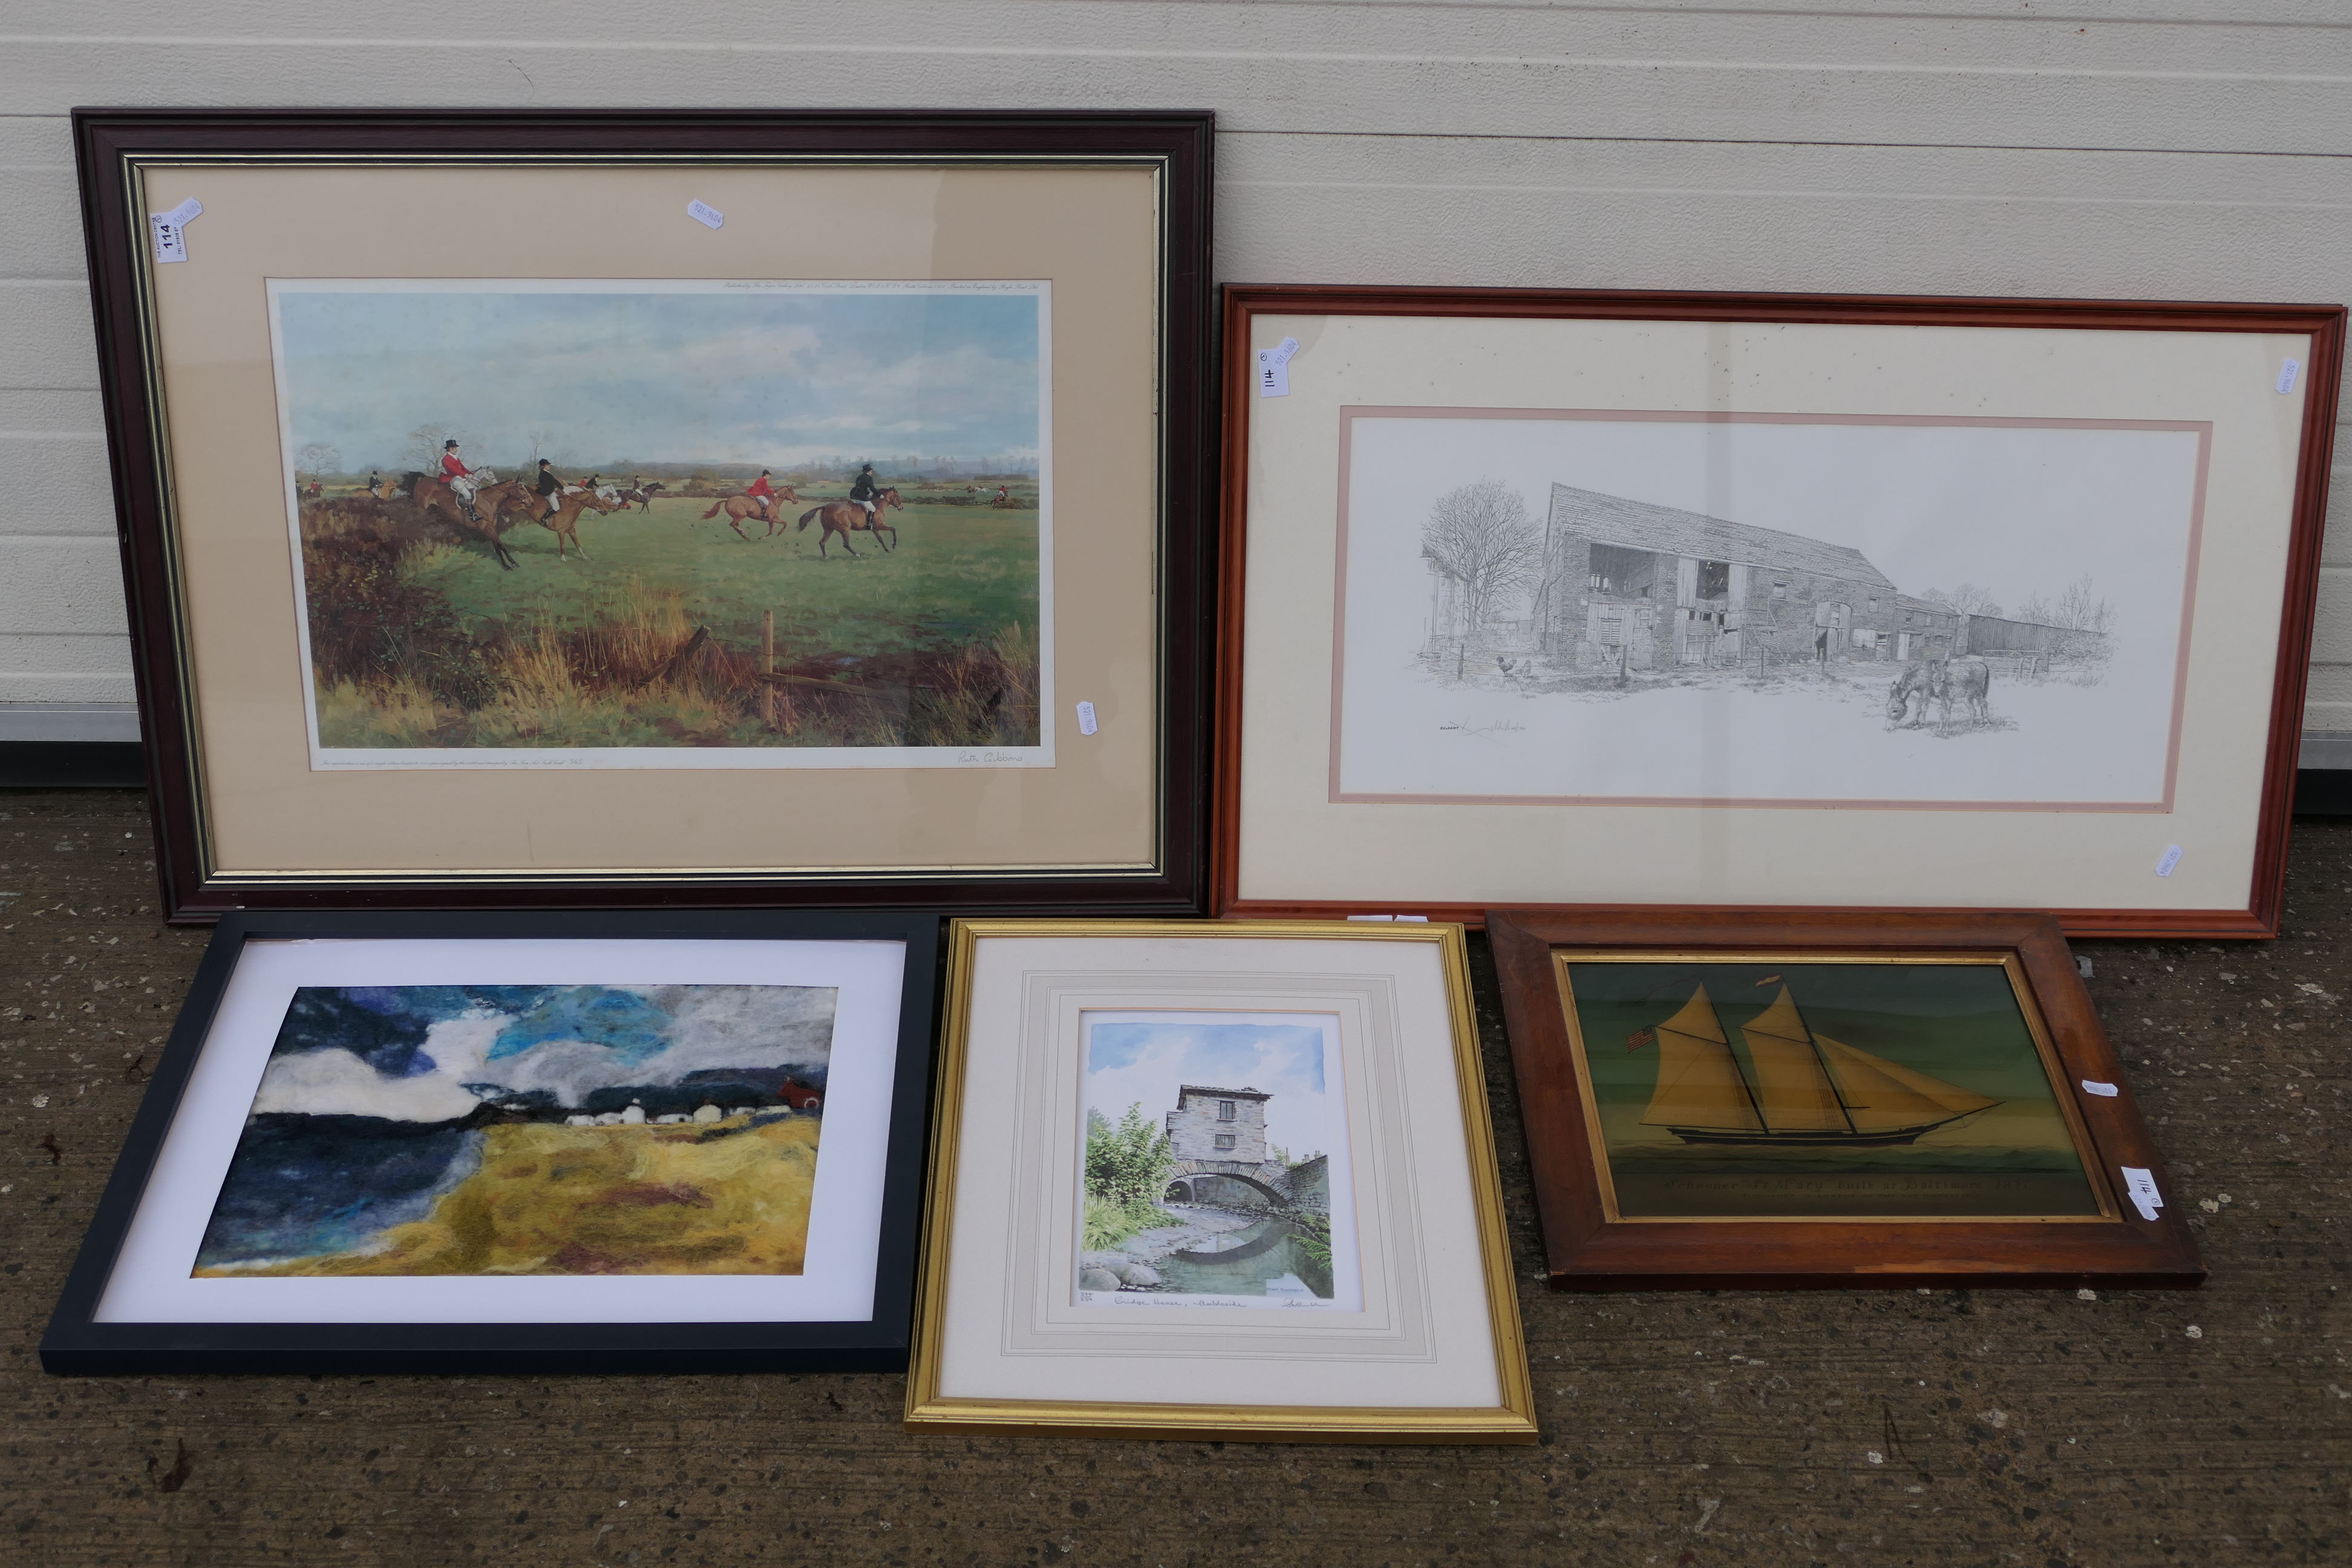 A collection of framed pictures to include a limited edition print depicting a hunting scene after